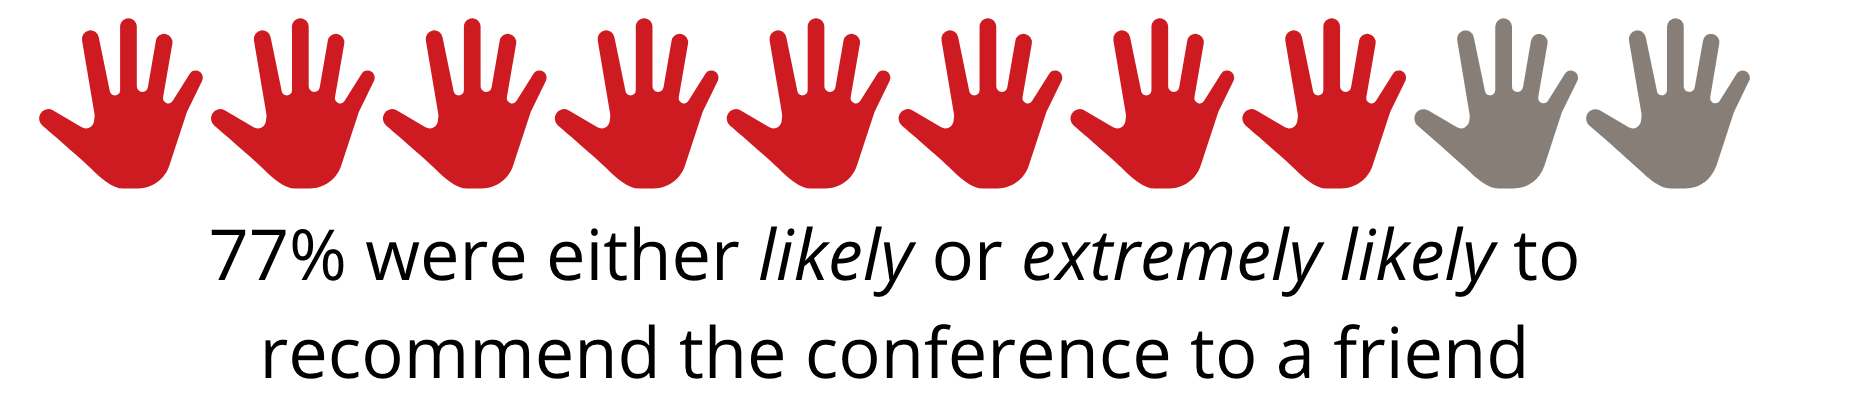 77% were either likely or extremely likely to recommend the conference to a friend